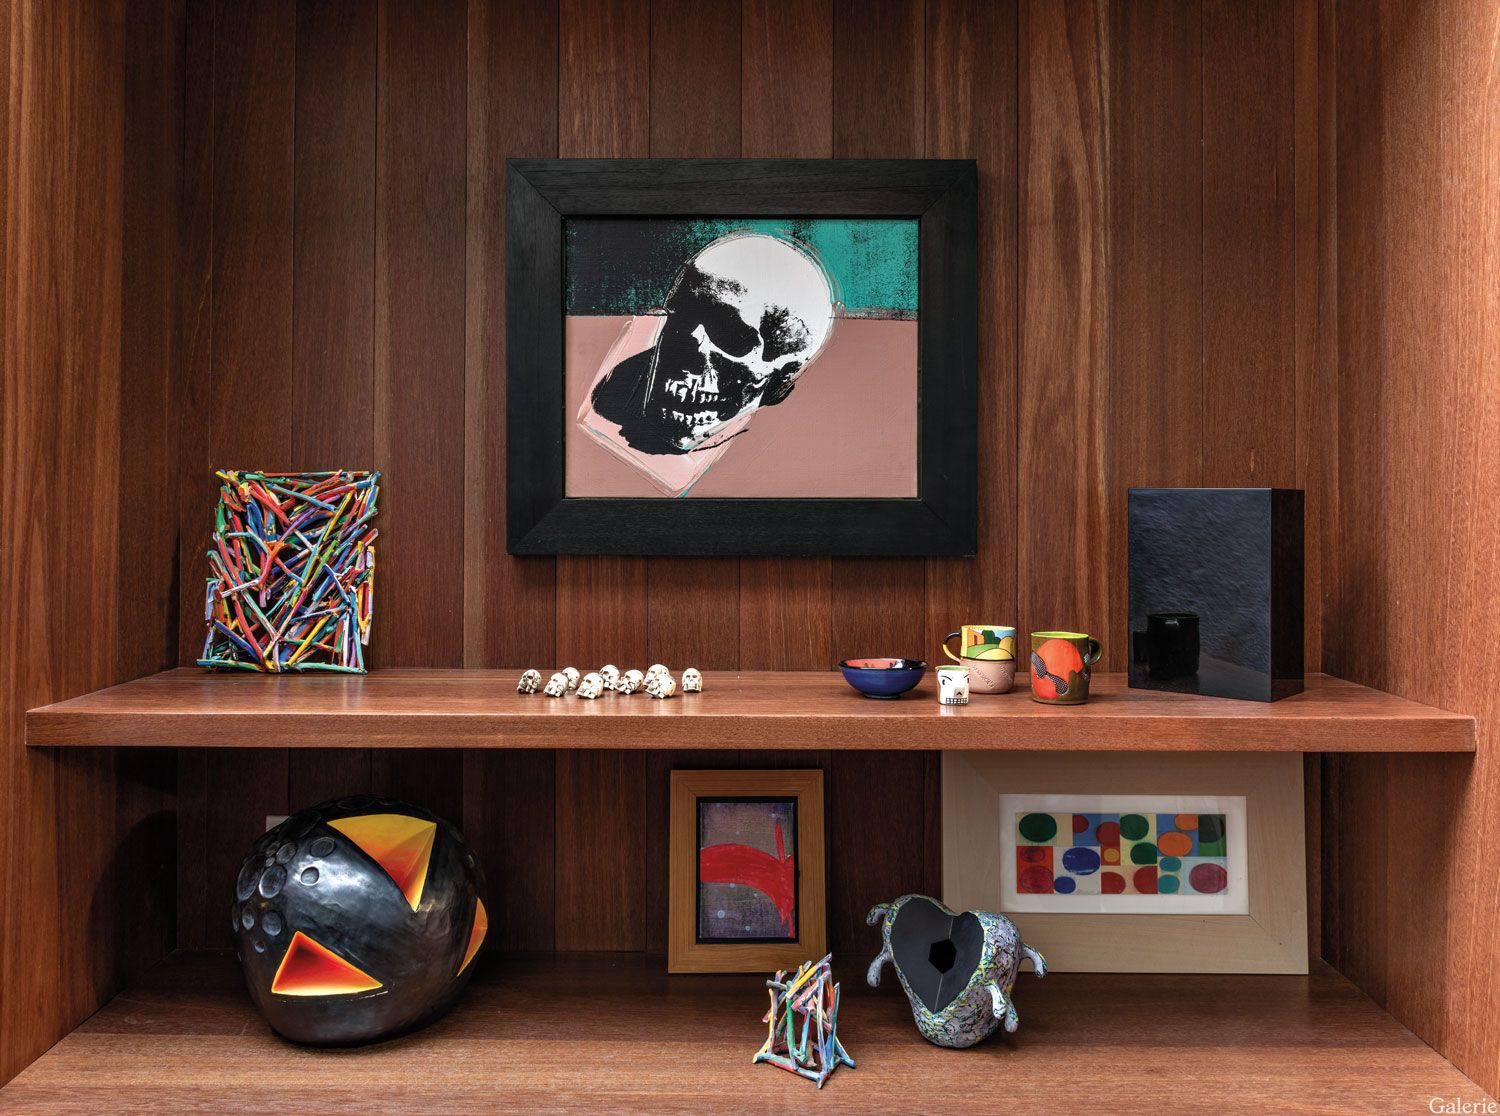 An Andy Warhol skull is grouped with works by Arnoldi, Ken Price, John McCracken, and Natalie Arnoldi in a bookcase.